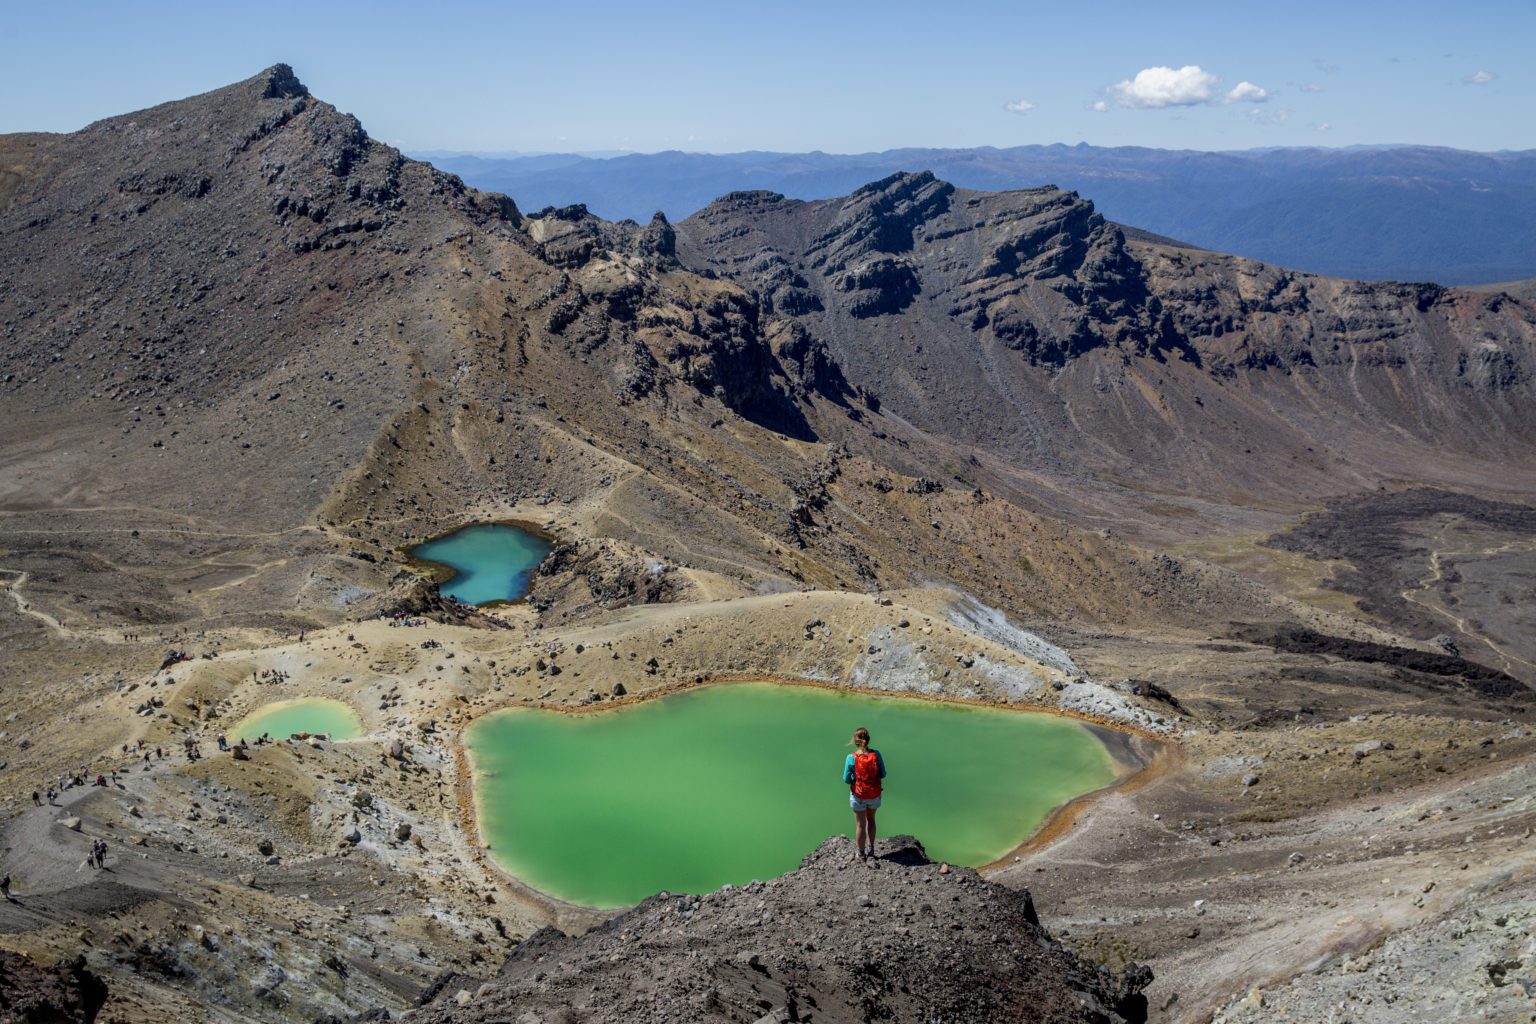 A hiker stops to admire the green lake on the Tongariro Alpine Crossing